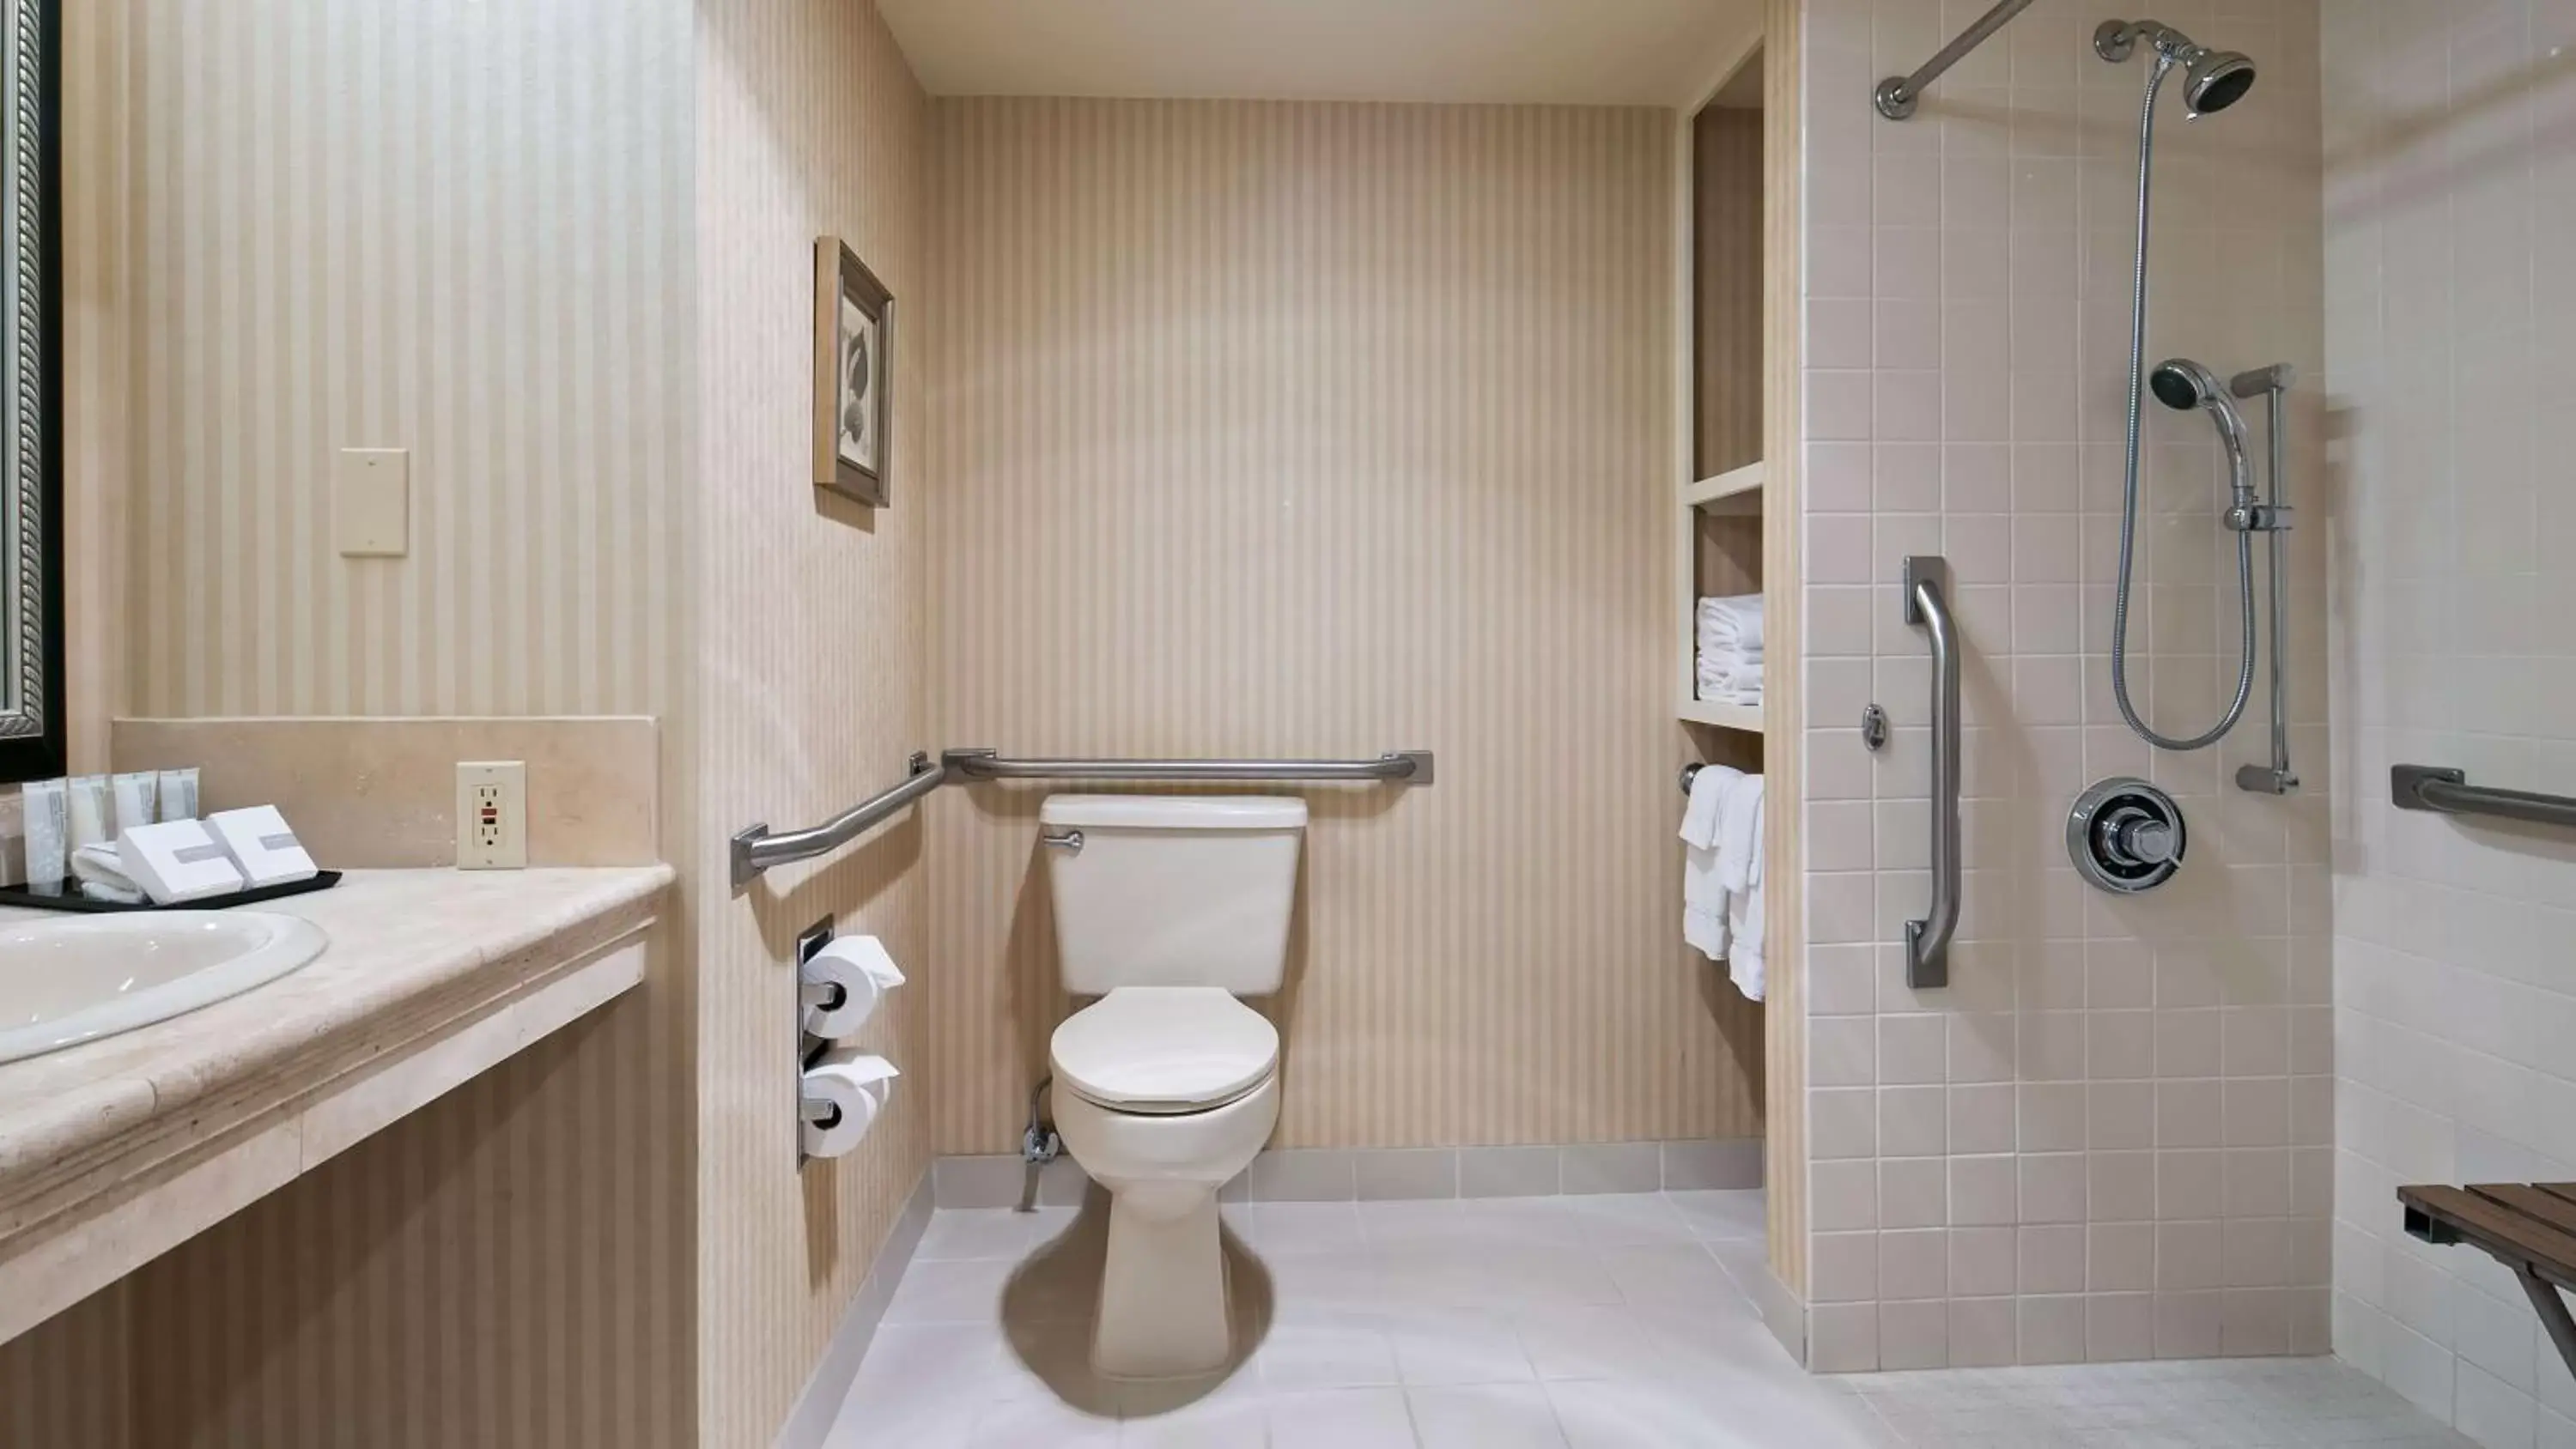 Bathroom in Best Western Premier Plaza Hotel and Conference Center